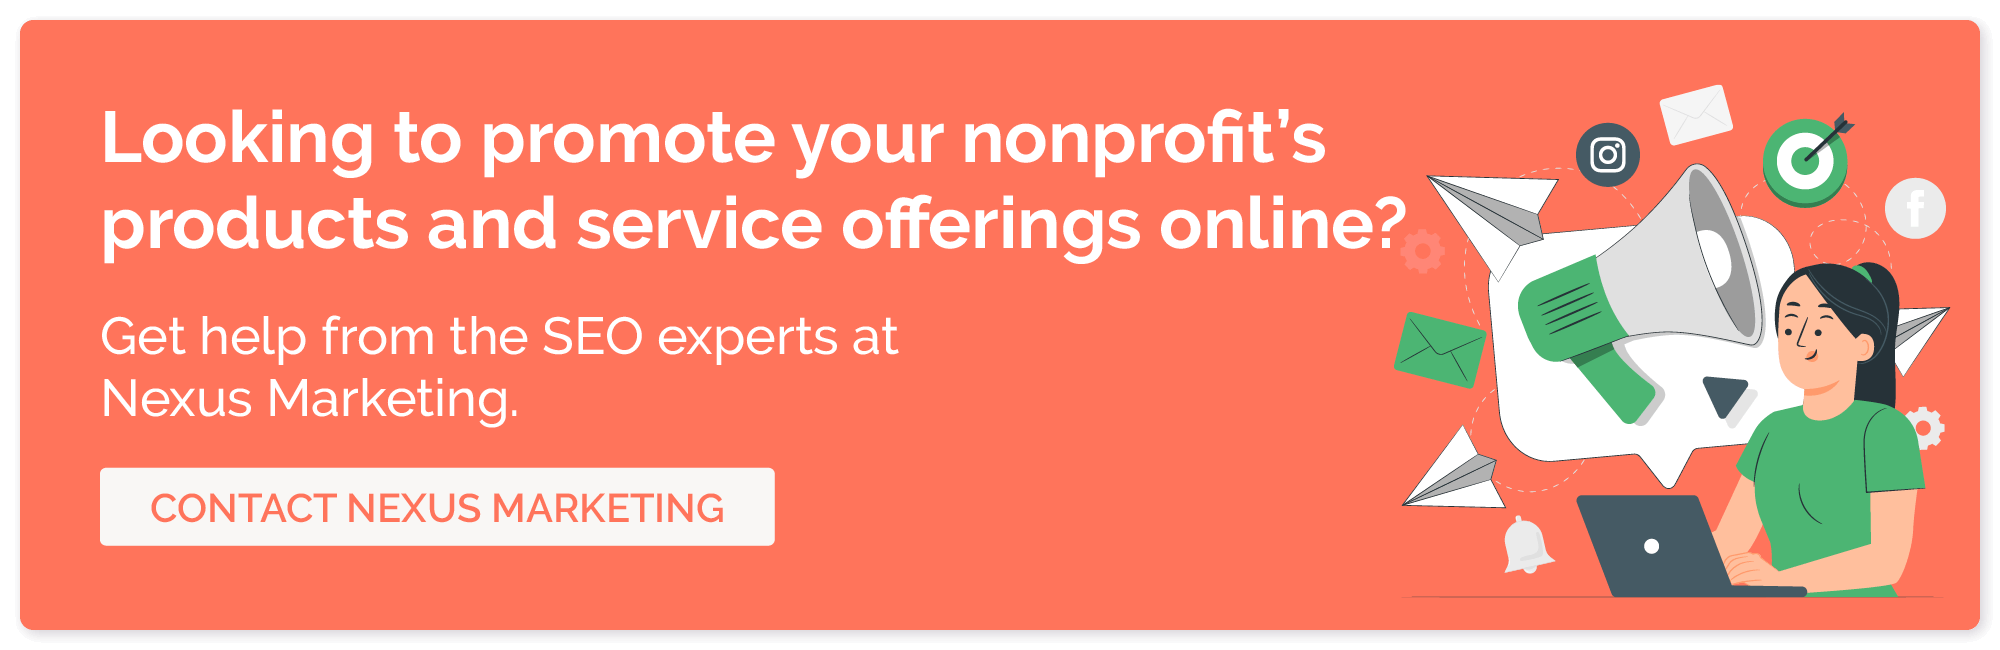 Looking to promote your nonprofit’s products and service offerings online? Get help from our recommended SEO experts.